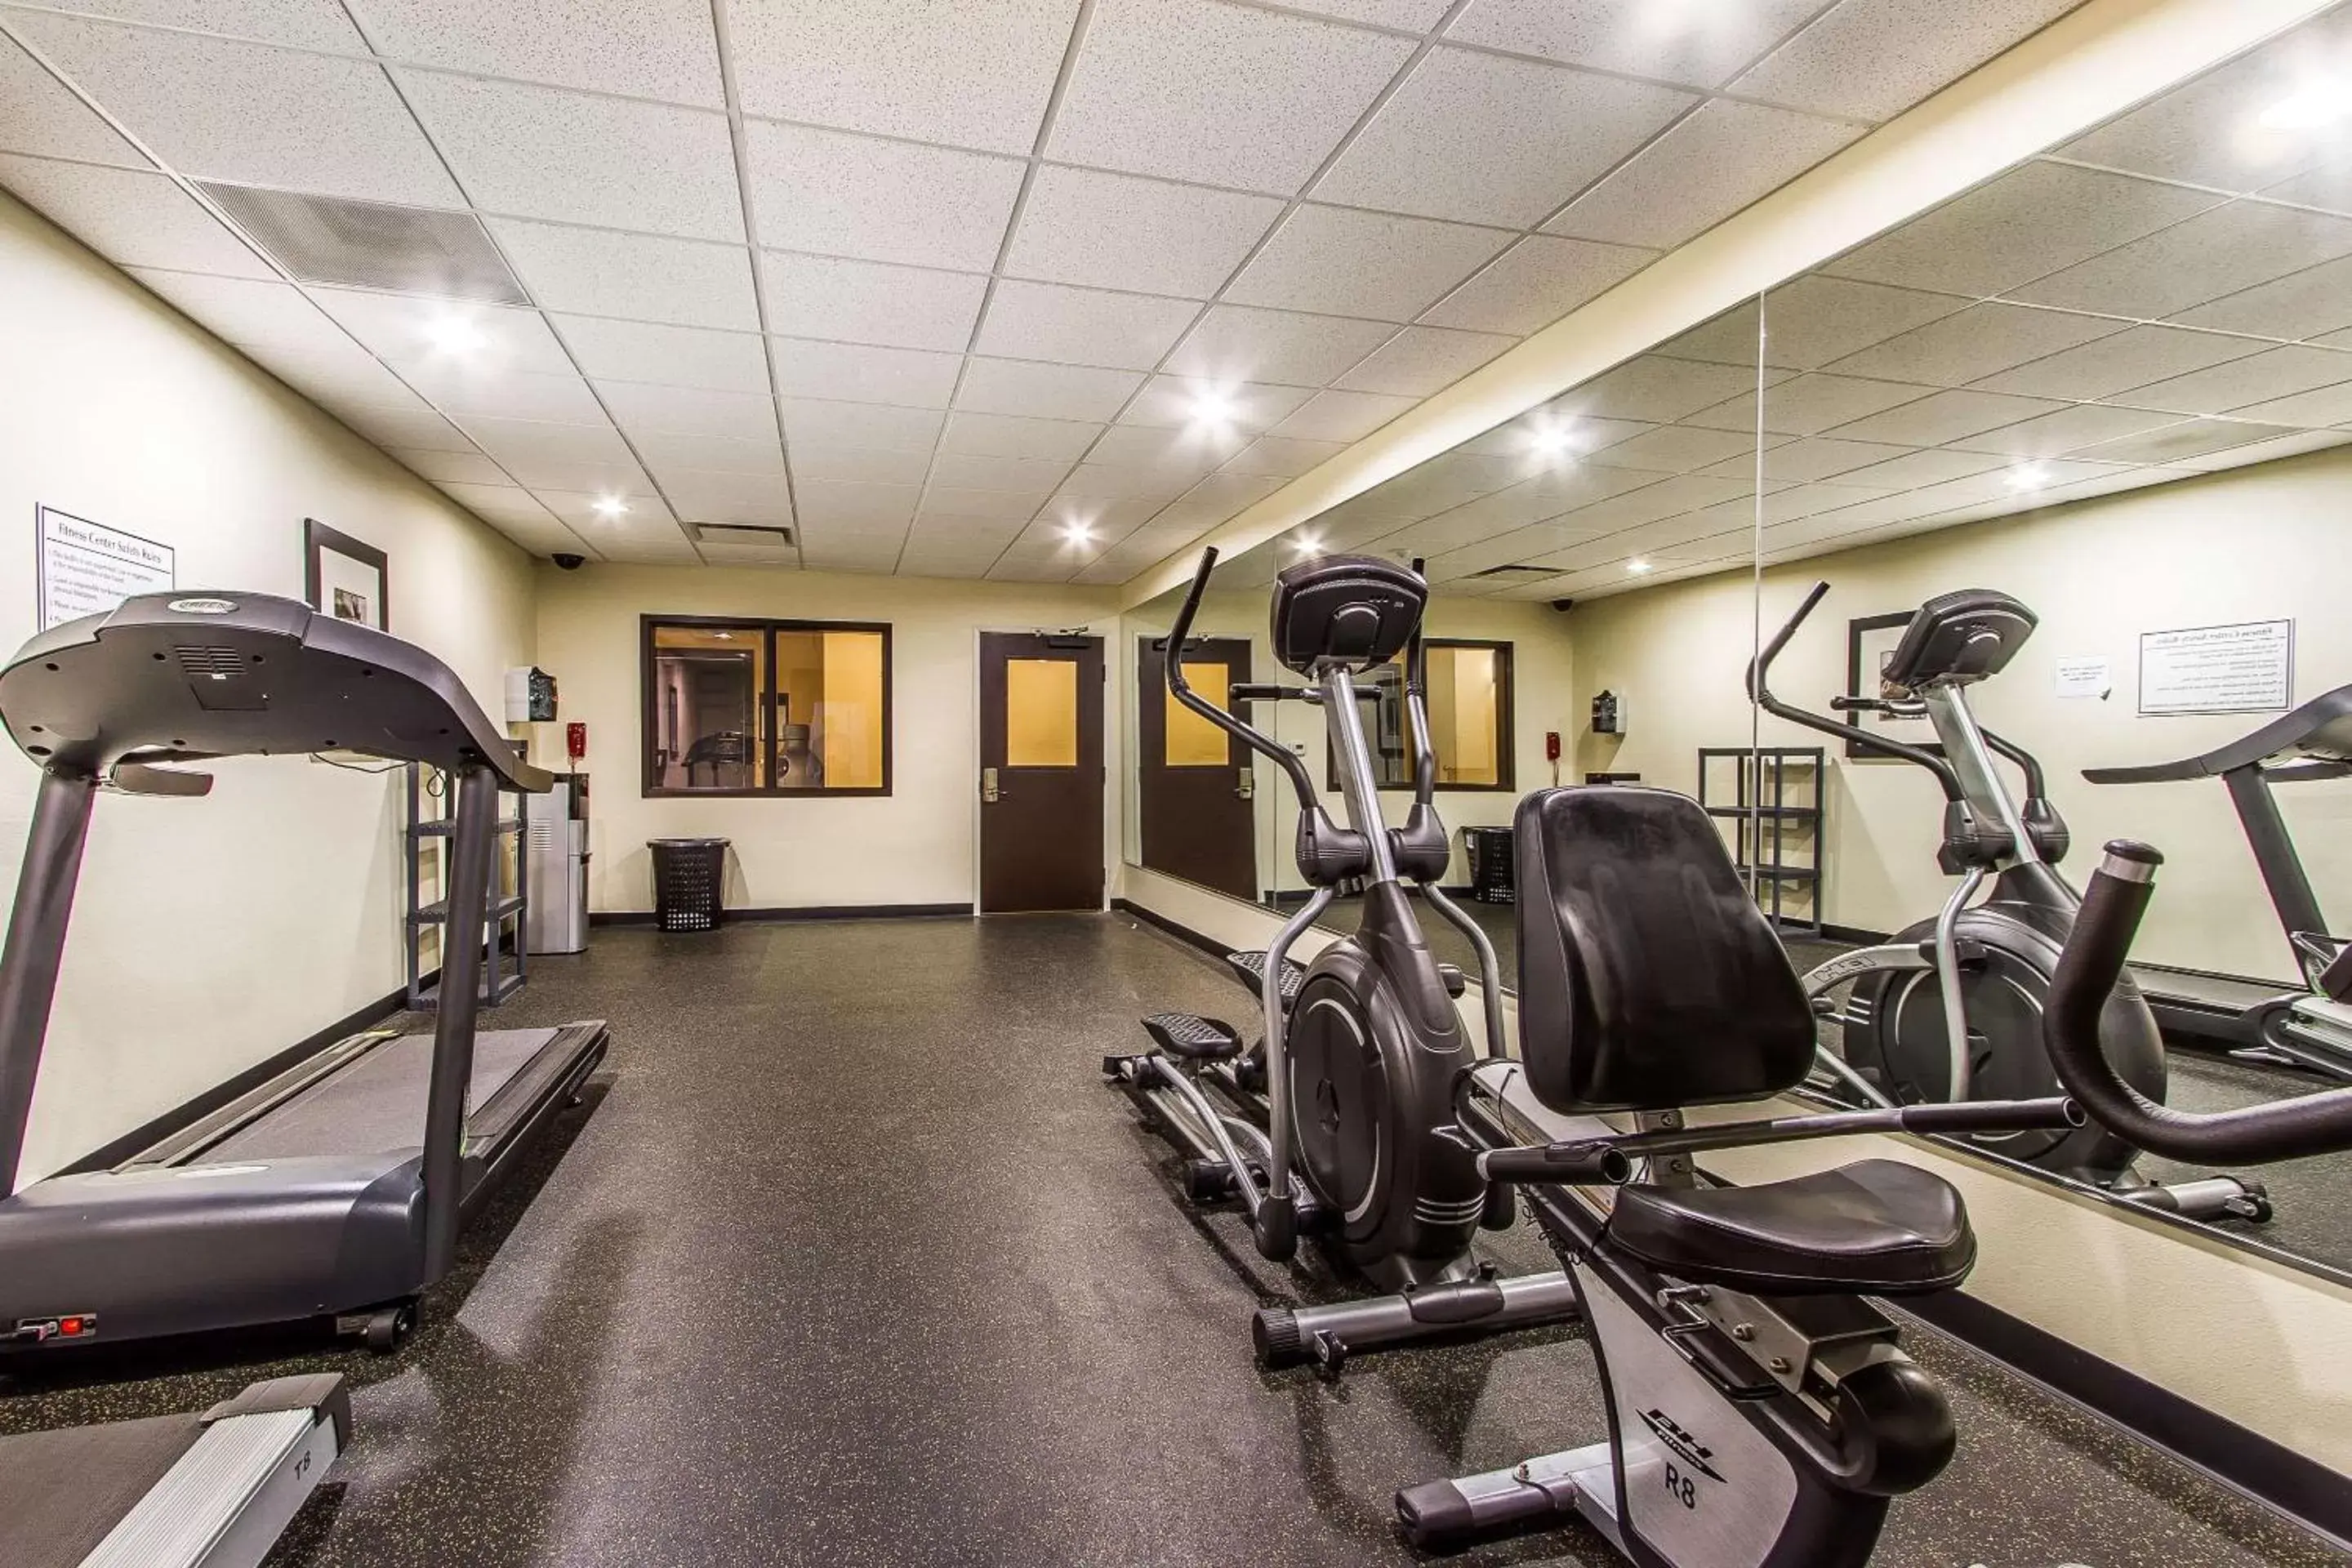 Fitness centre/facilities, Fitness Center/Facilities in Evangeline Downs Hotel, Ascend Hotel Collection